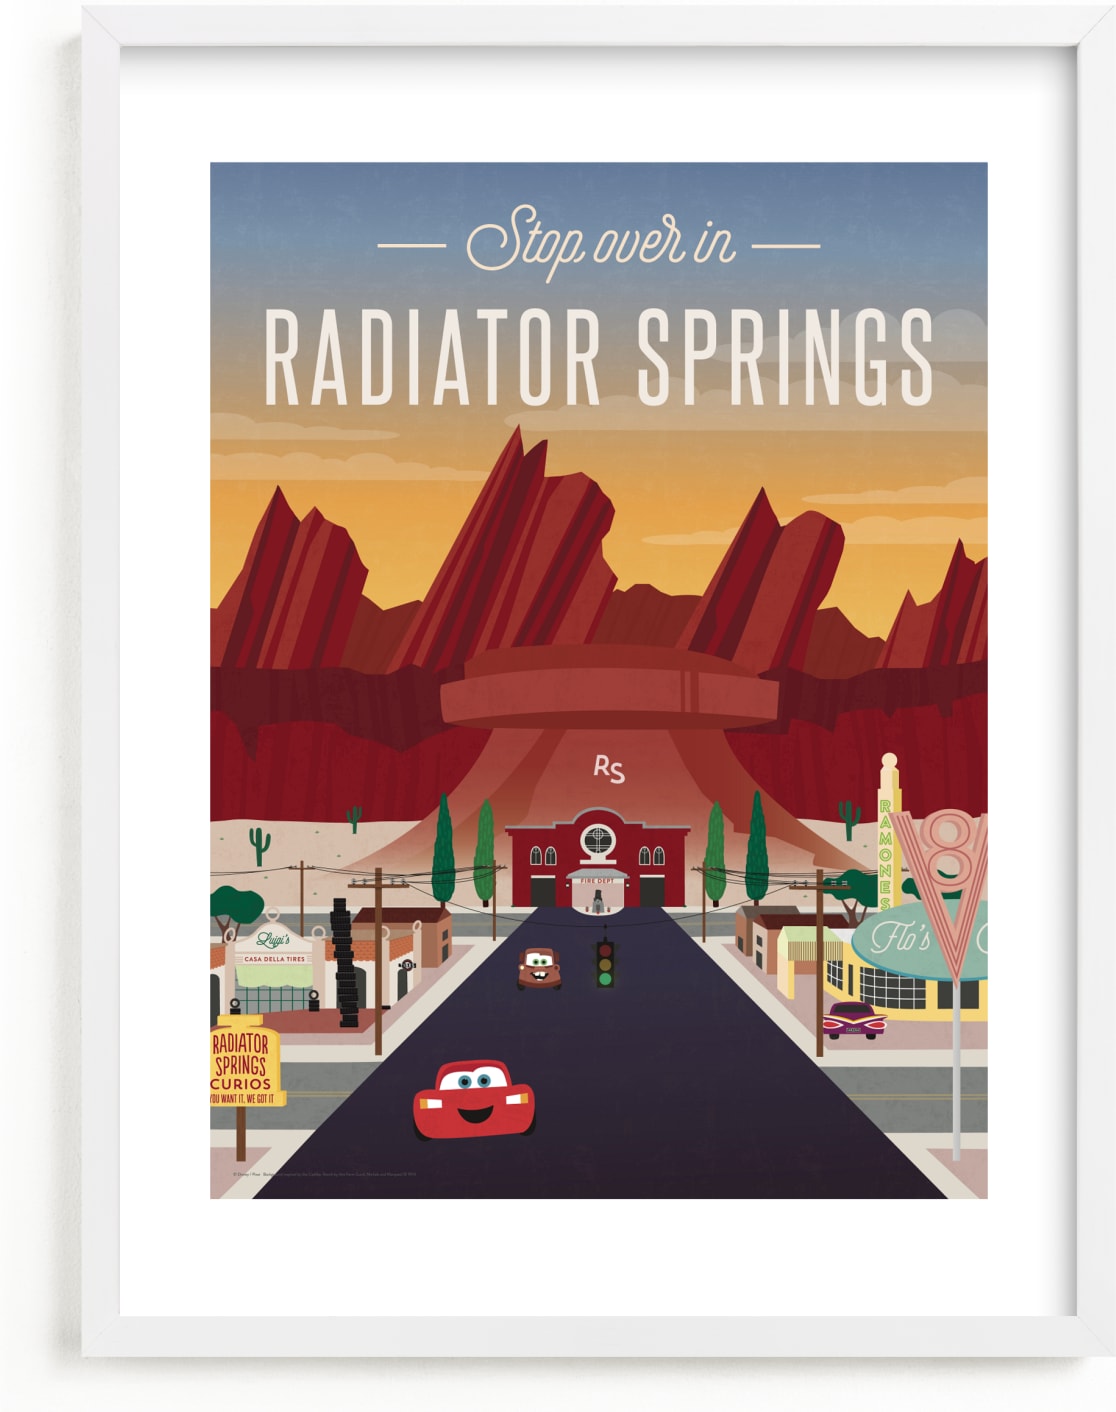 This is a colorful, beige, red disney art by Erica Krystek called Stop Over In Radiator Springs from Disney and Pixar's Cars.